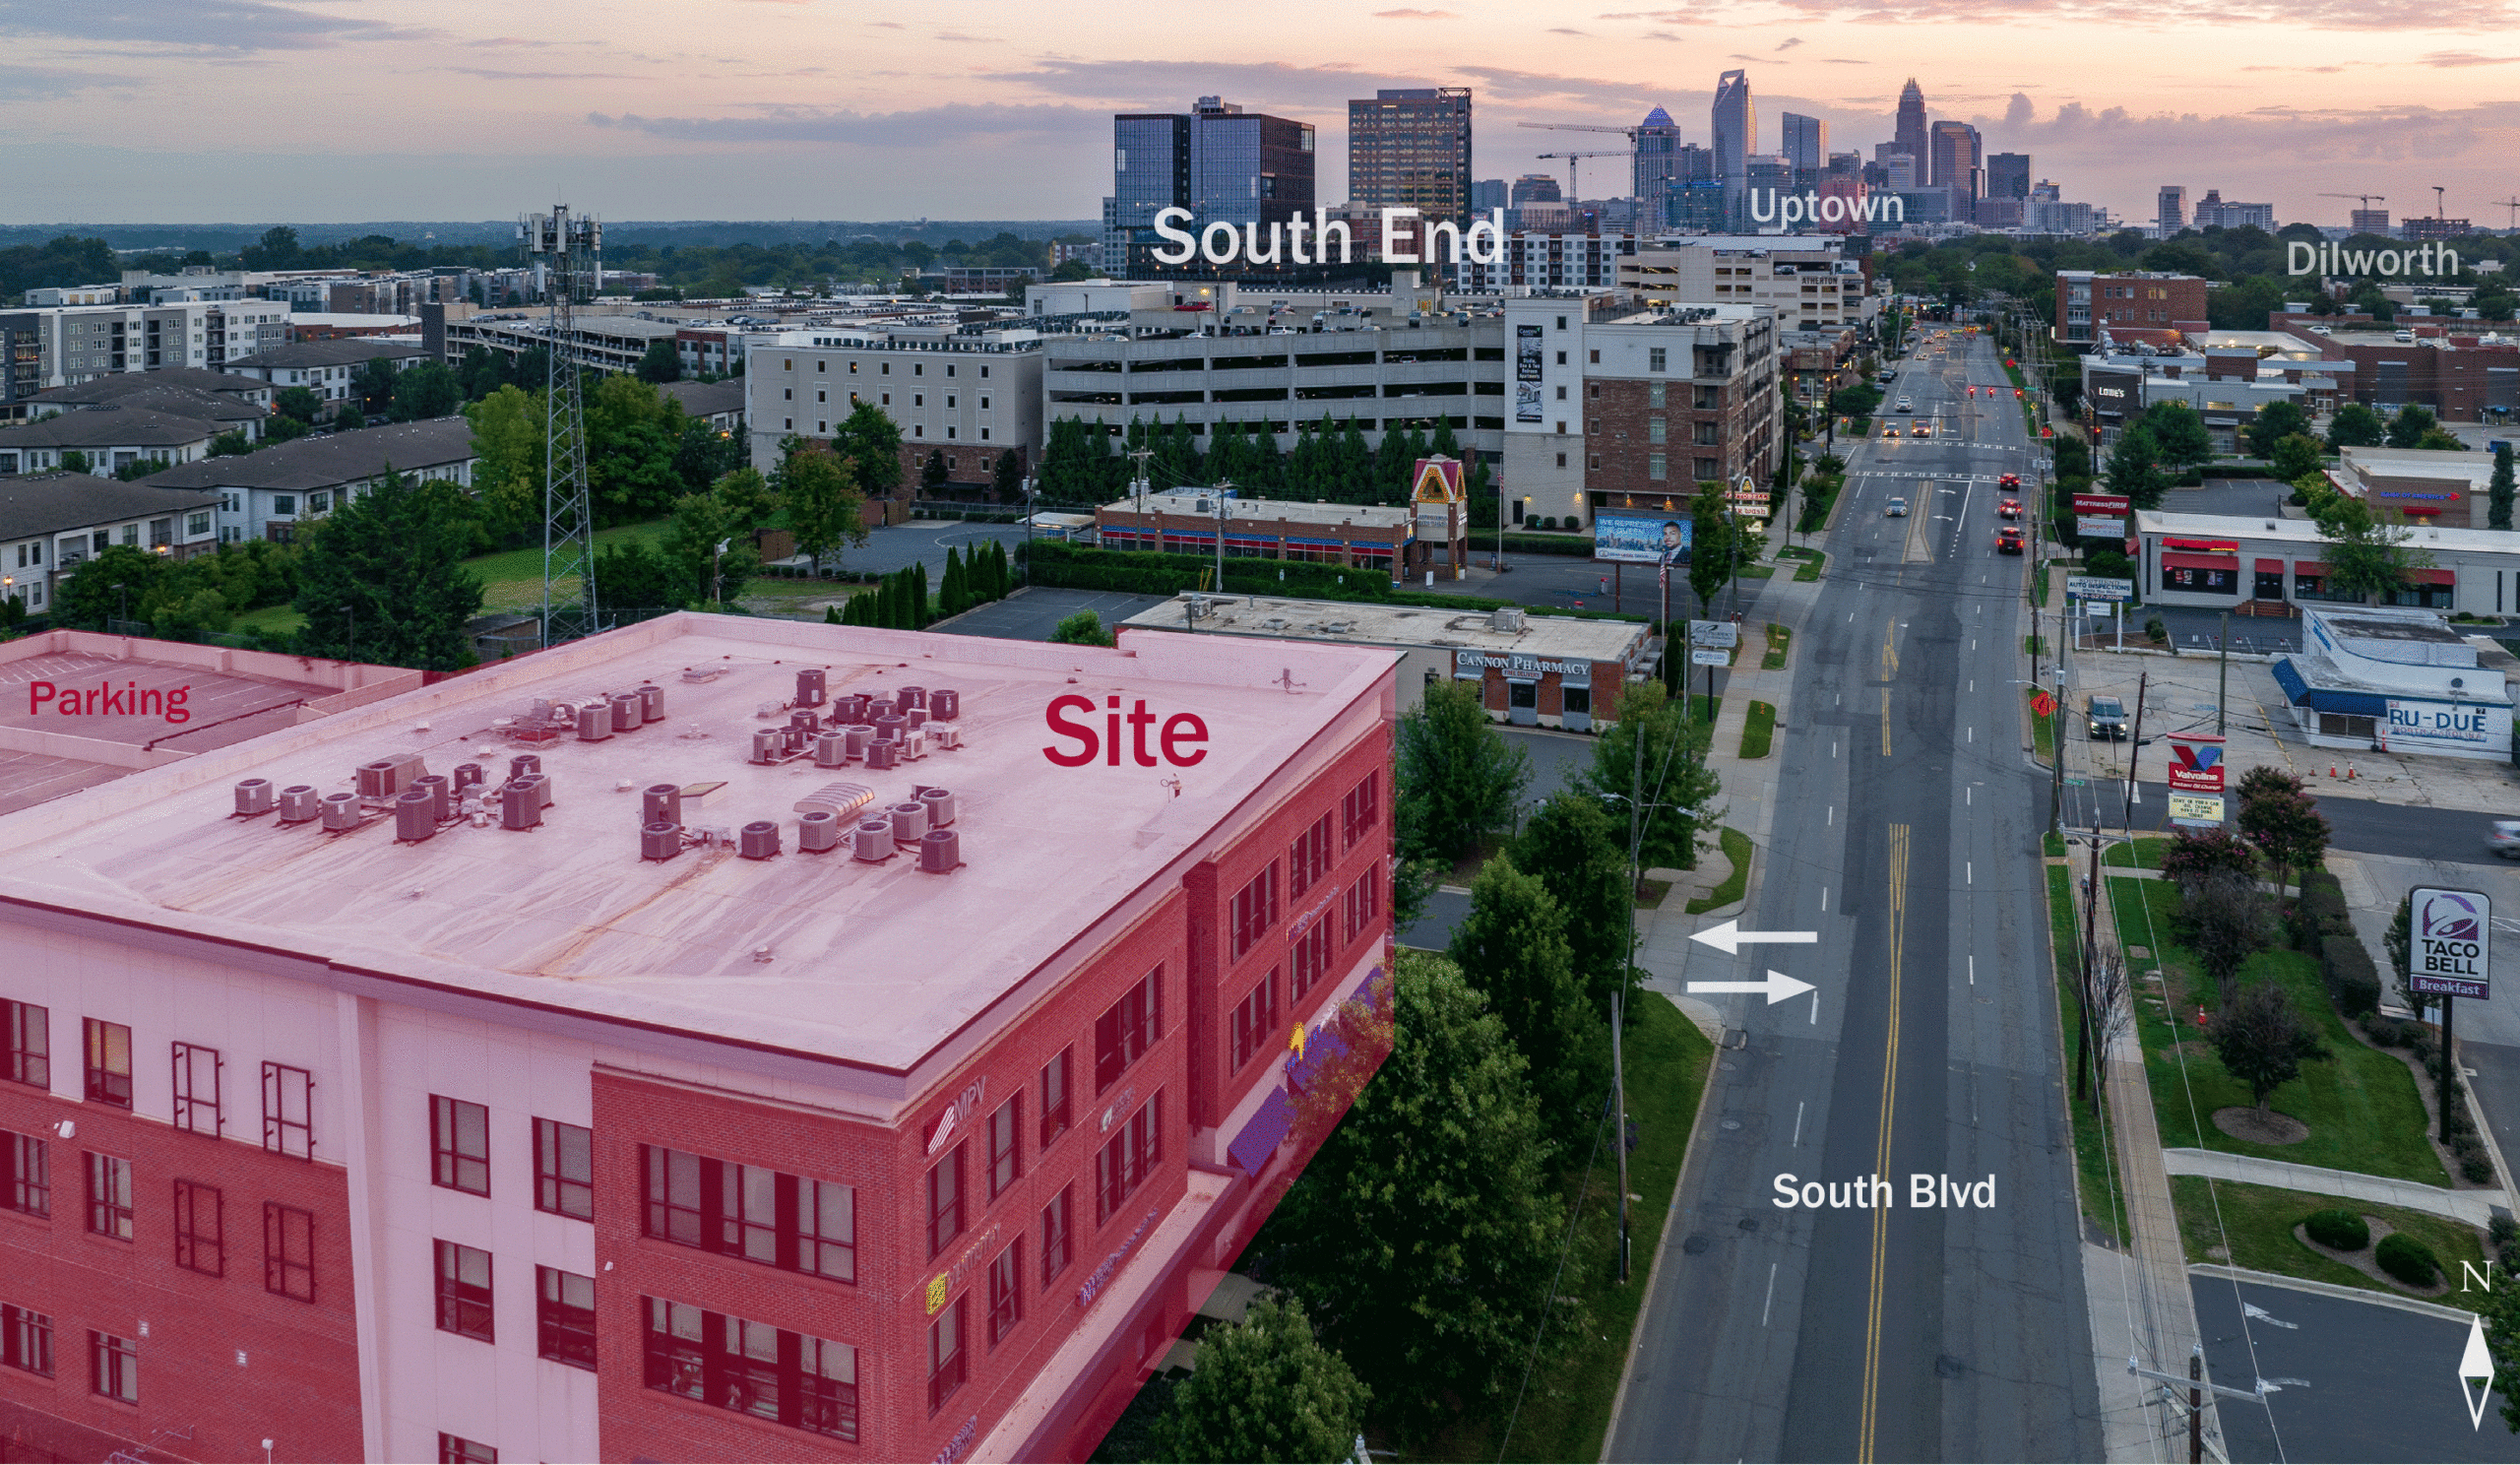 3D Drone Footage of 2400 South Blvd and Uptown Skyline